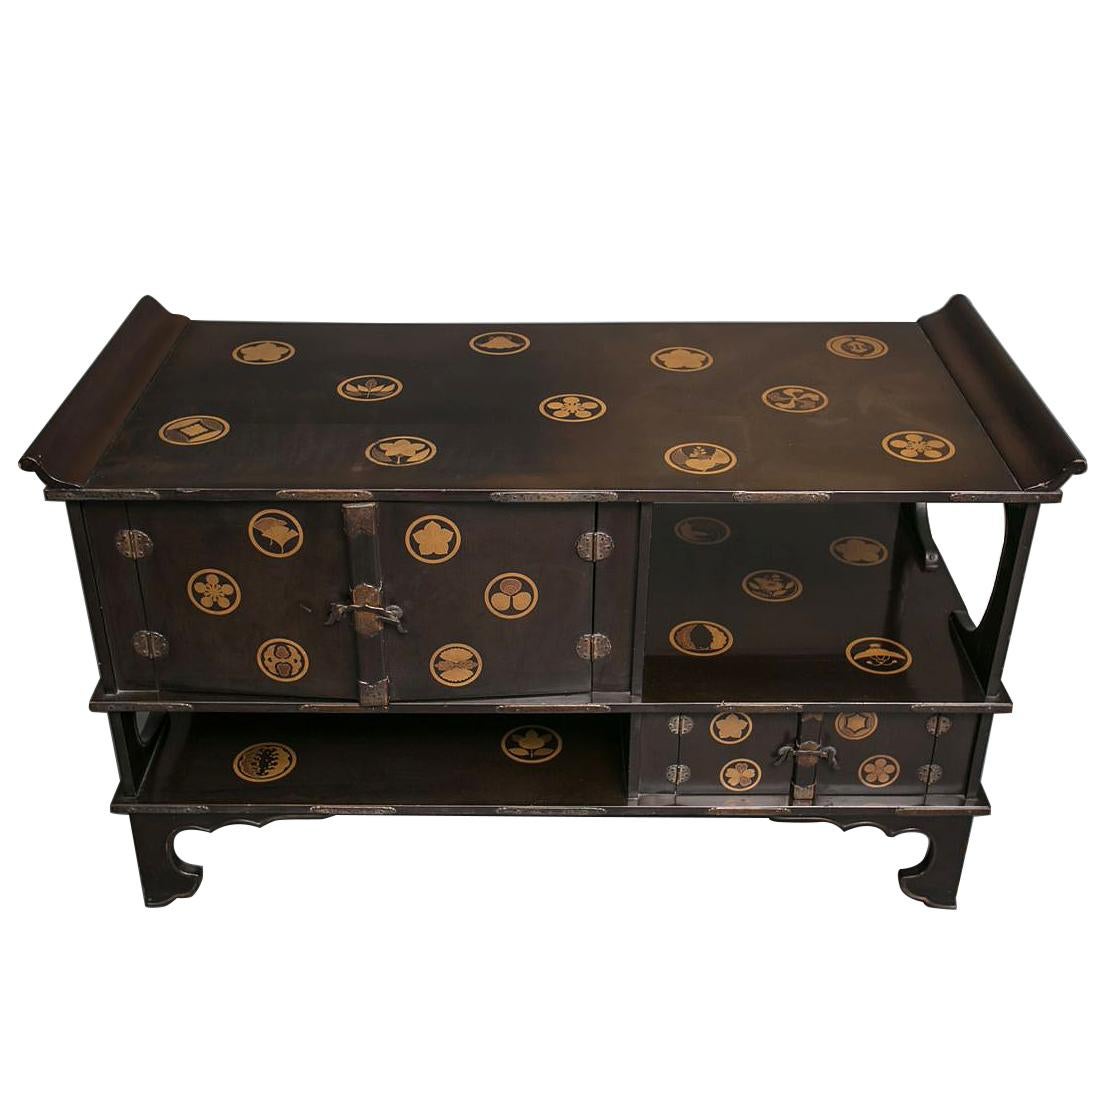 Japanese Black Lacquer Tana (Tiered Tea Cabinet) with Gold Family Crests